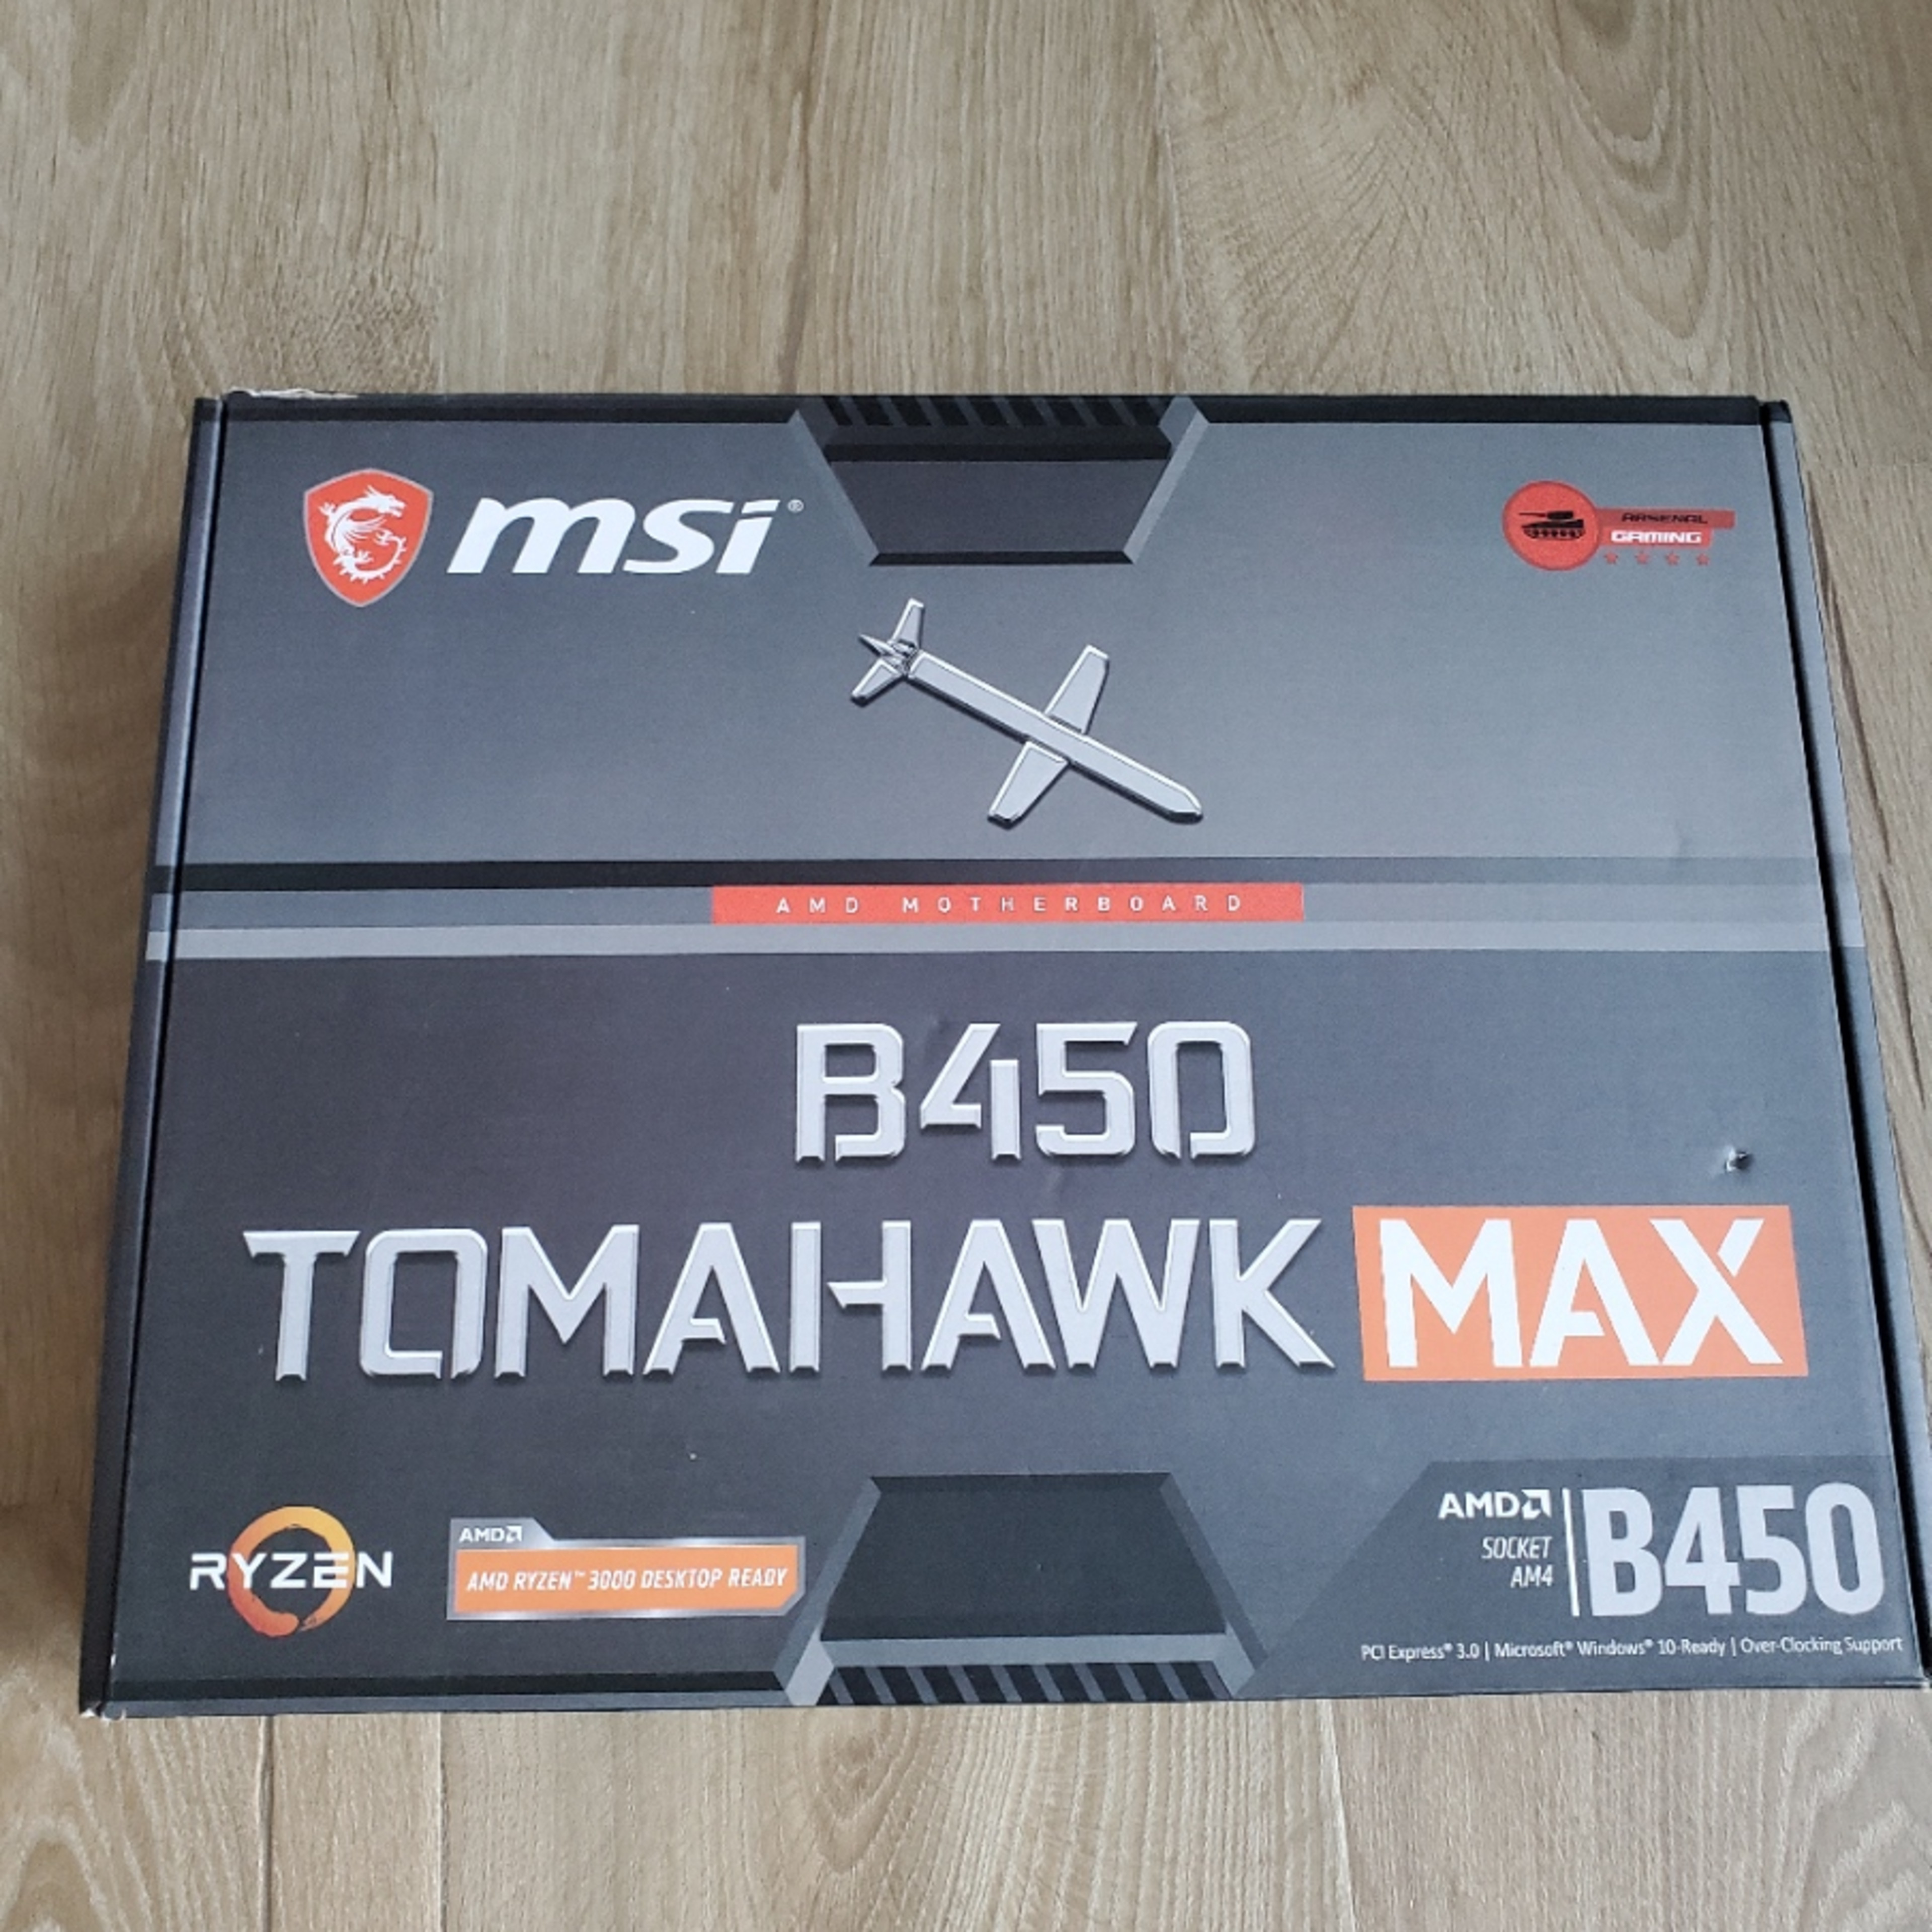 MSI B450 Tomahawk MAX ATX AM4 Motherboard - *GREAT CONDITION* - FREE SHIPPING